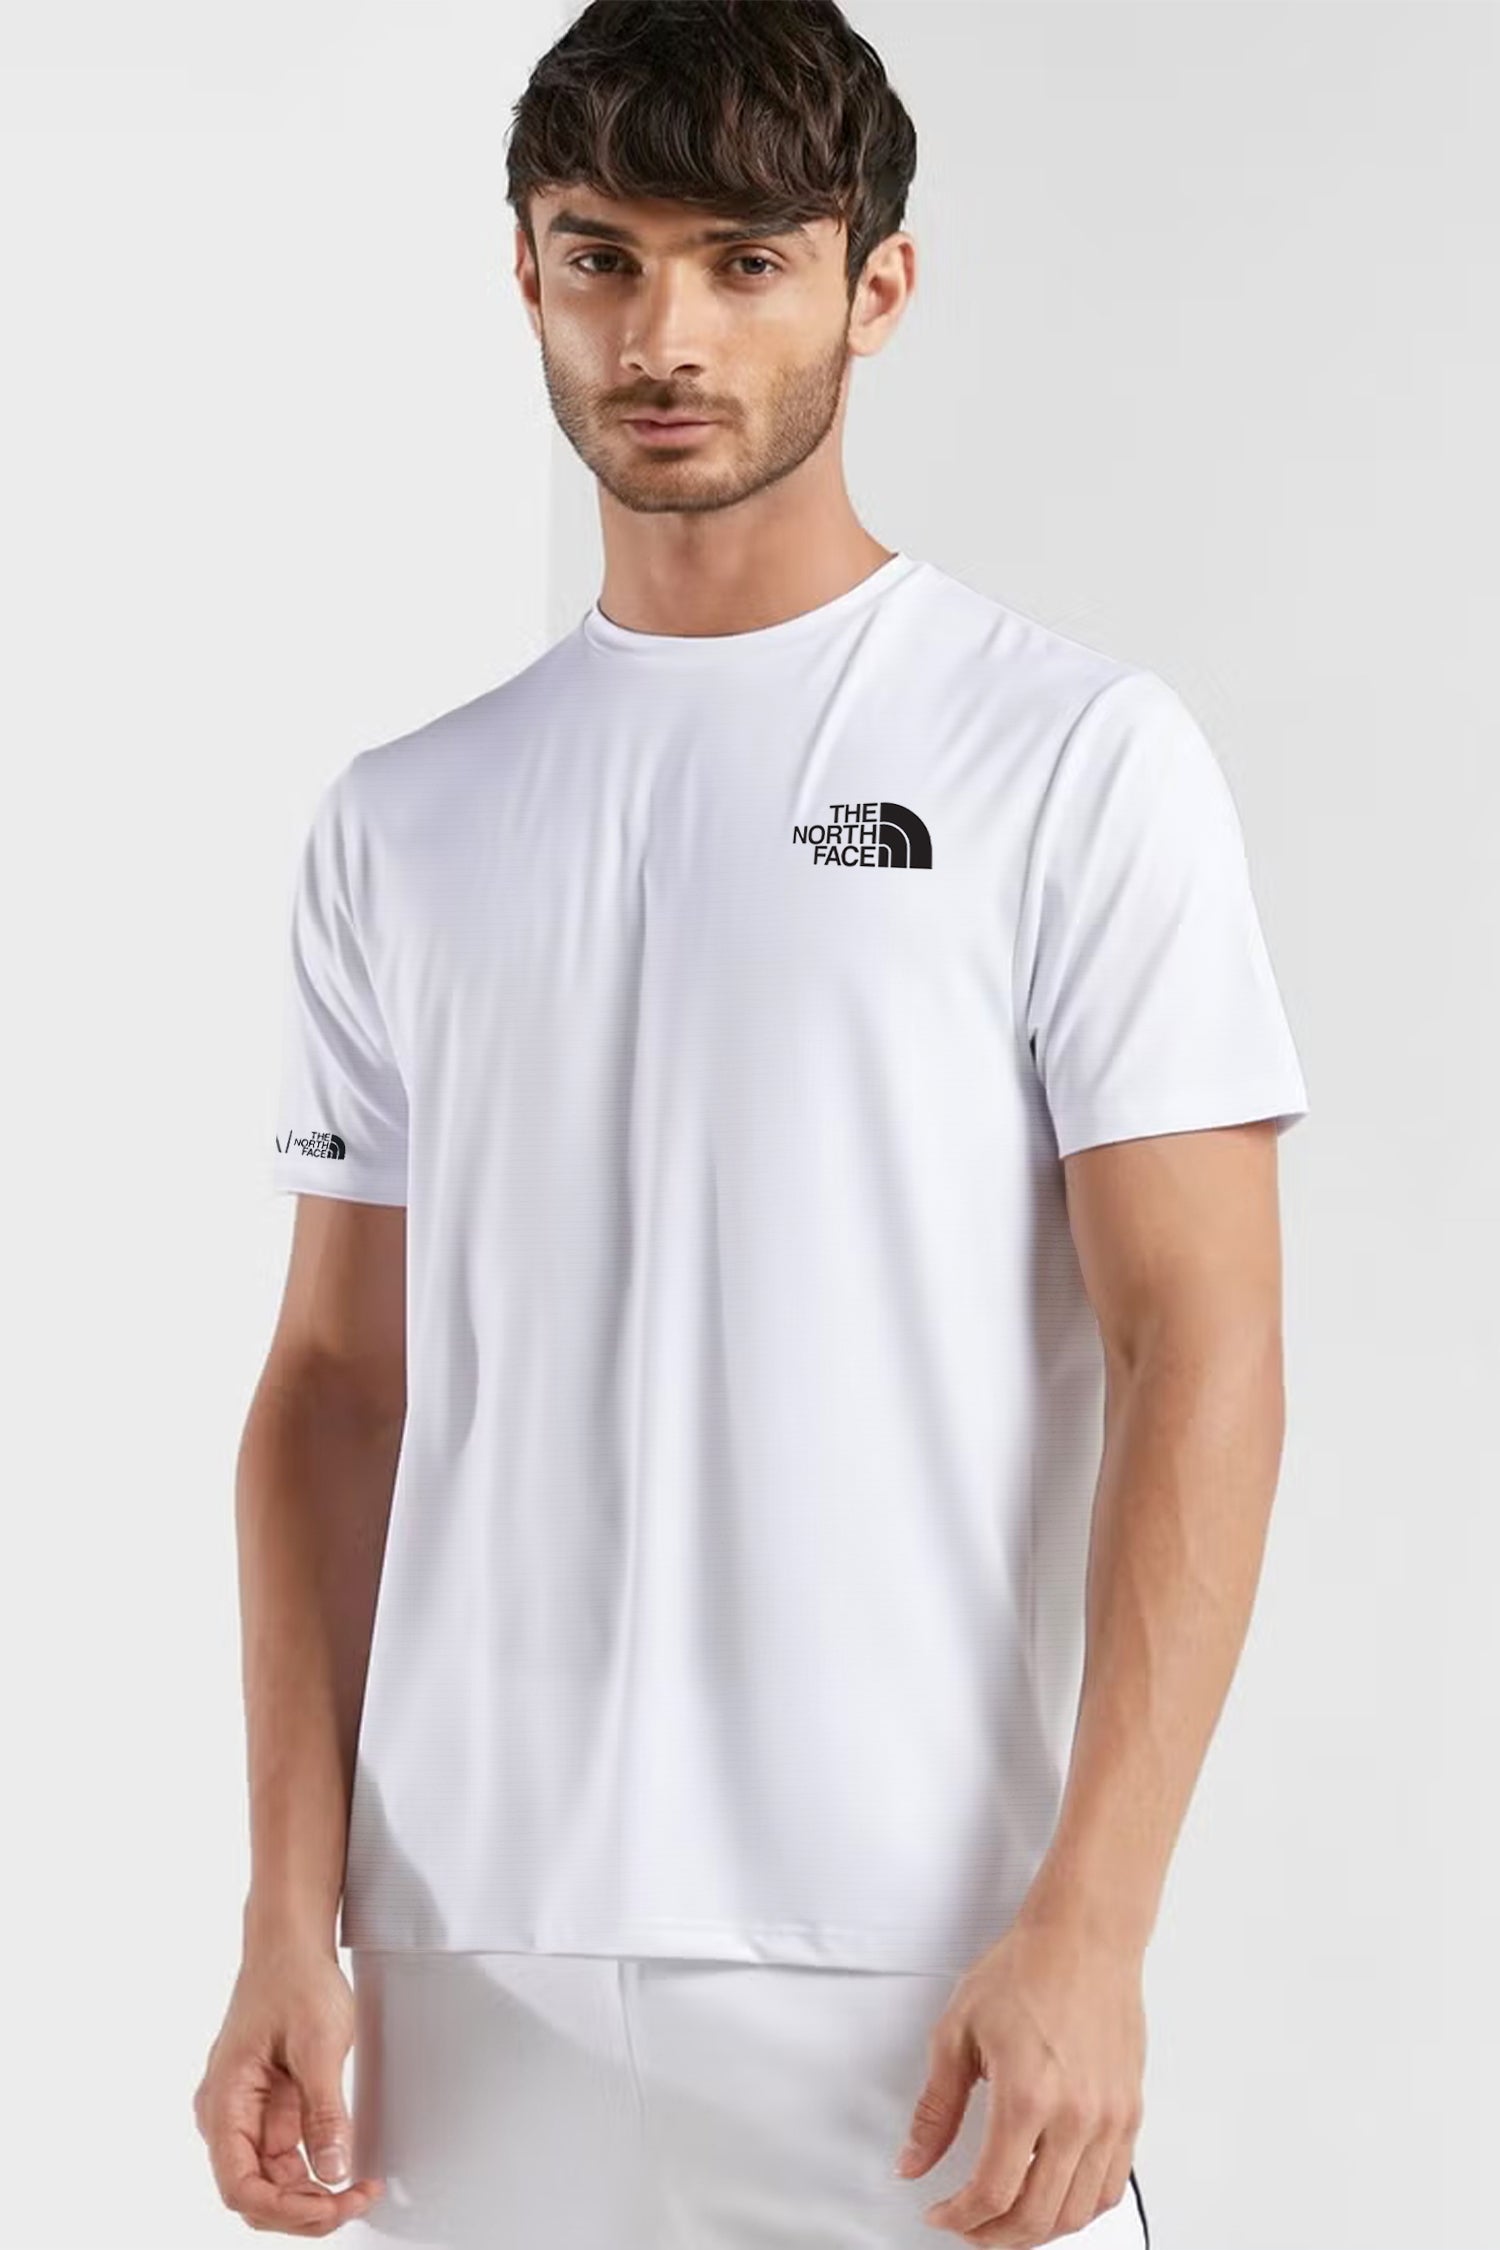 The Nrth Fce Reflector Logo Branded Dry Fit Tee